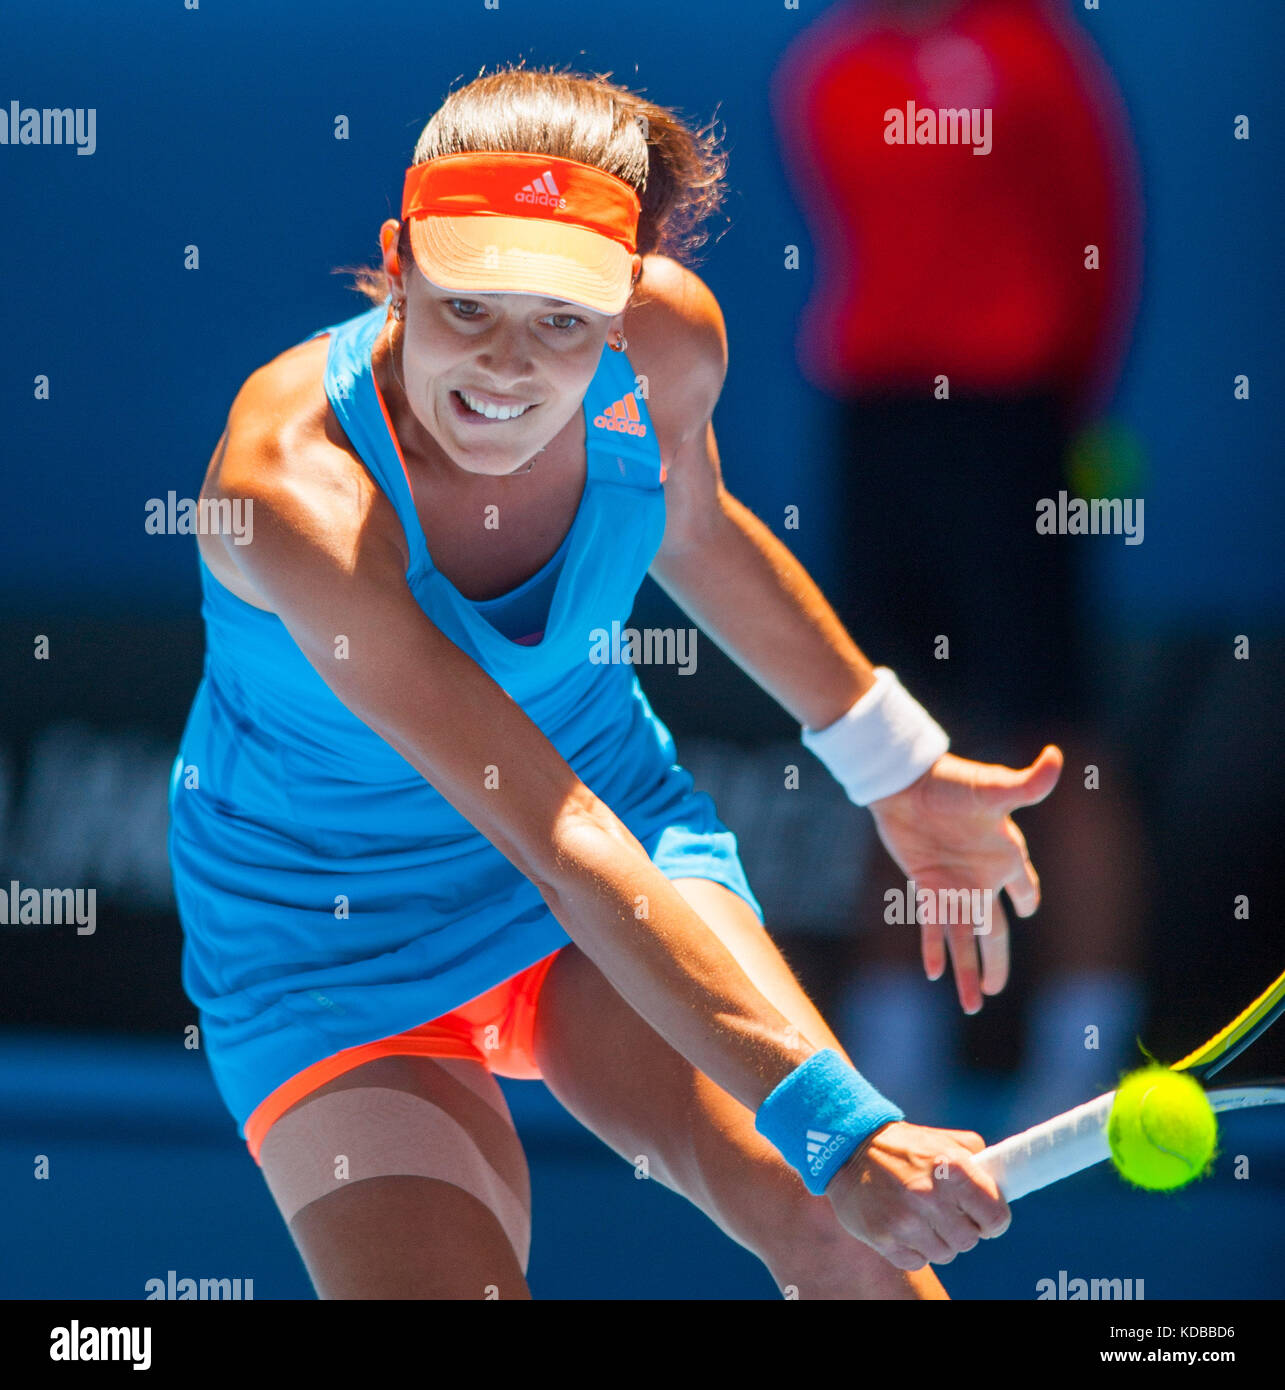 ANA IVANOVIC competes at the Australian Open. The Australian Open - a Grand  Slam Tournament - is the opening event of the tennis calendar annually  Stock Photo - Alamy